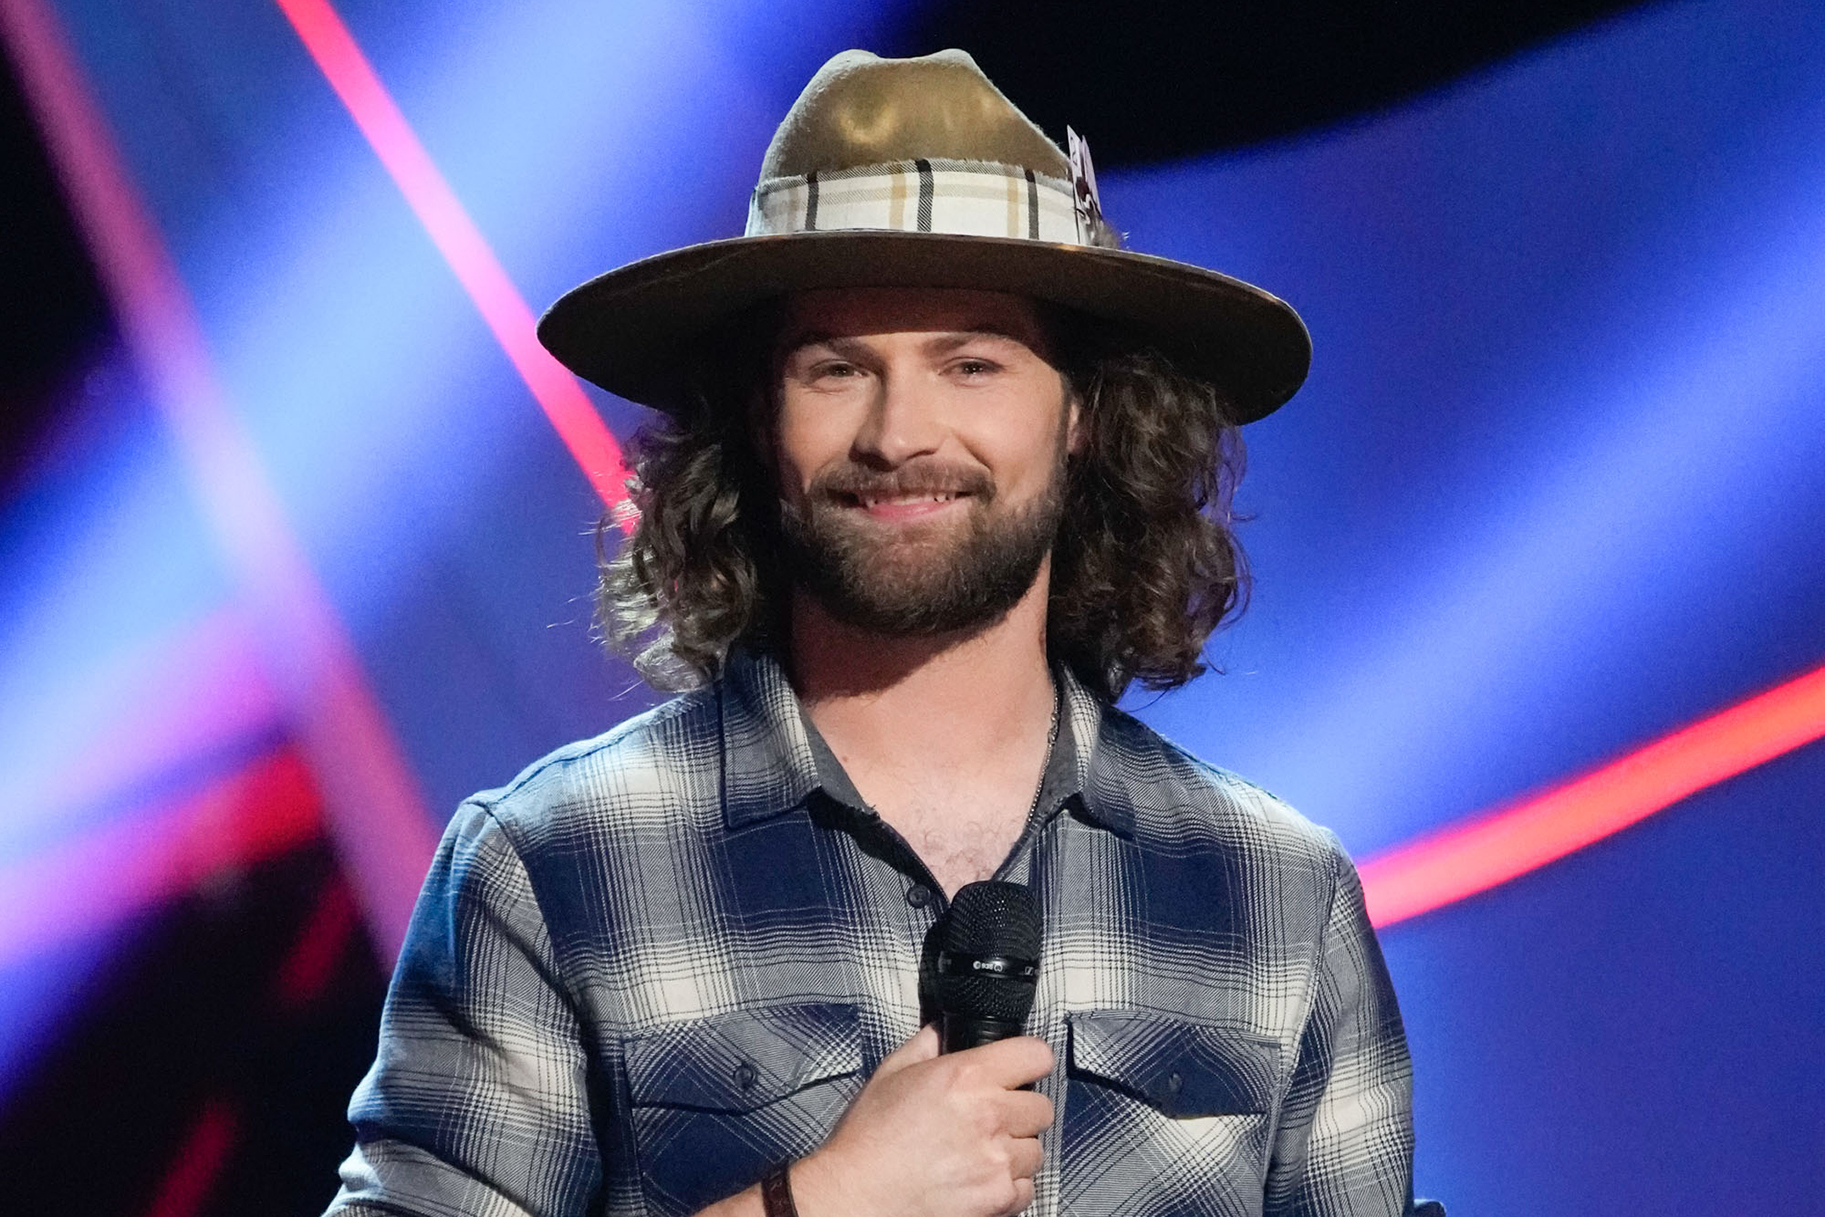 Walker Wilson on The Voice Blind Auditions Part 3